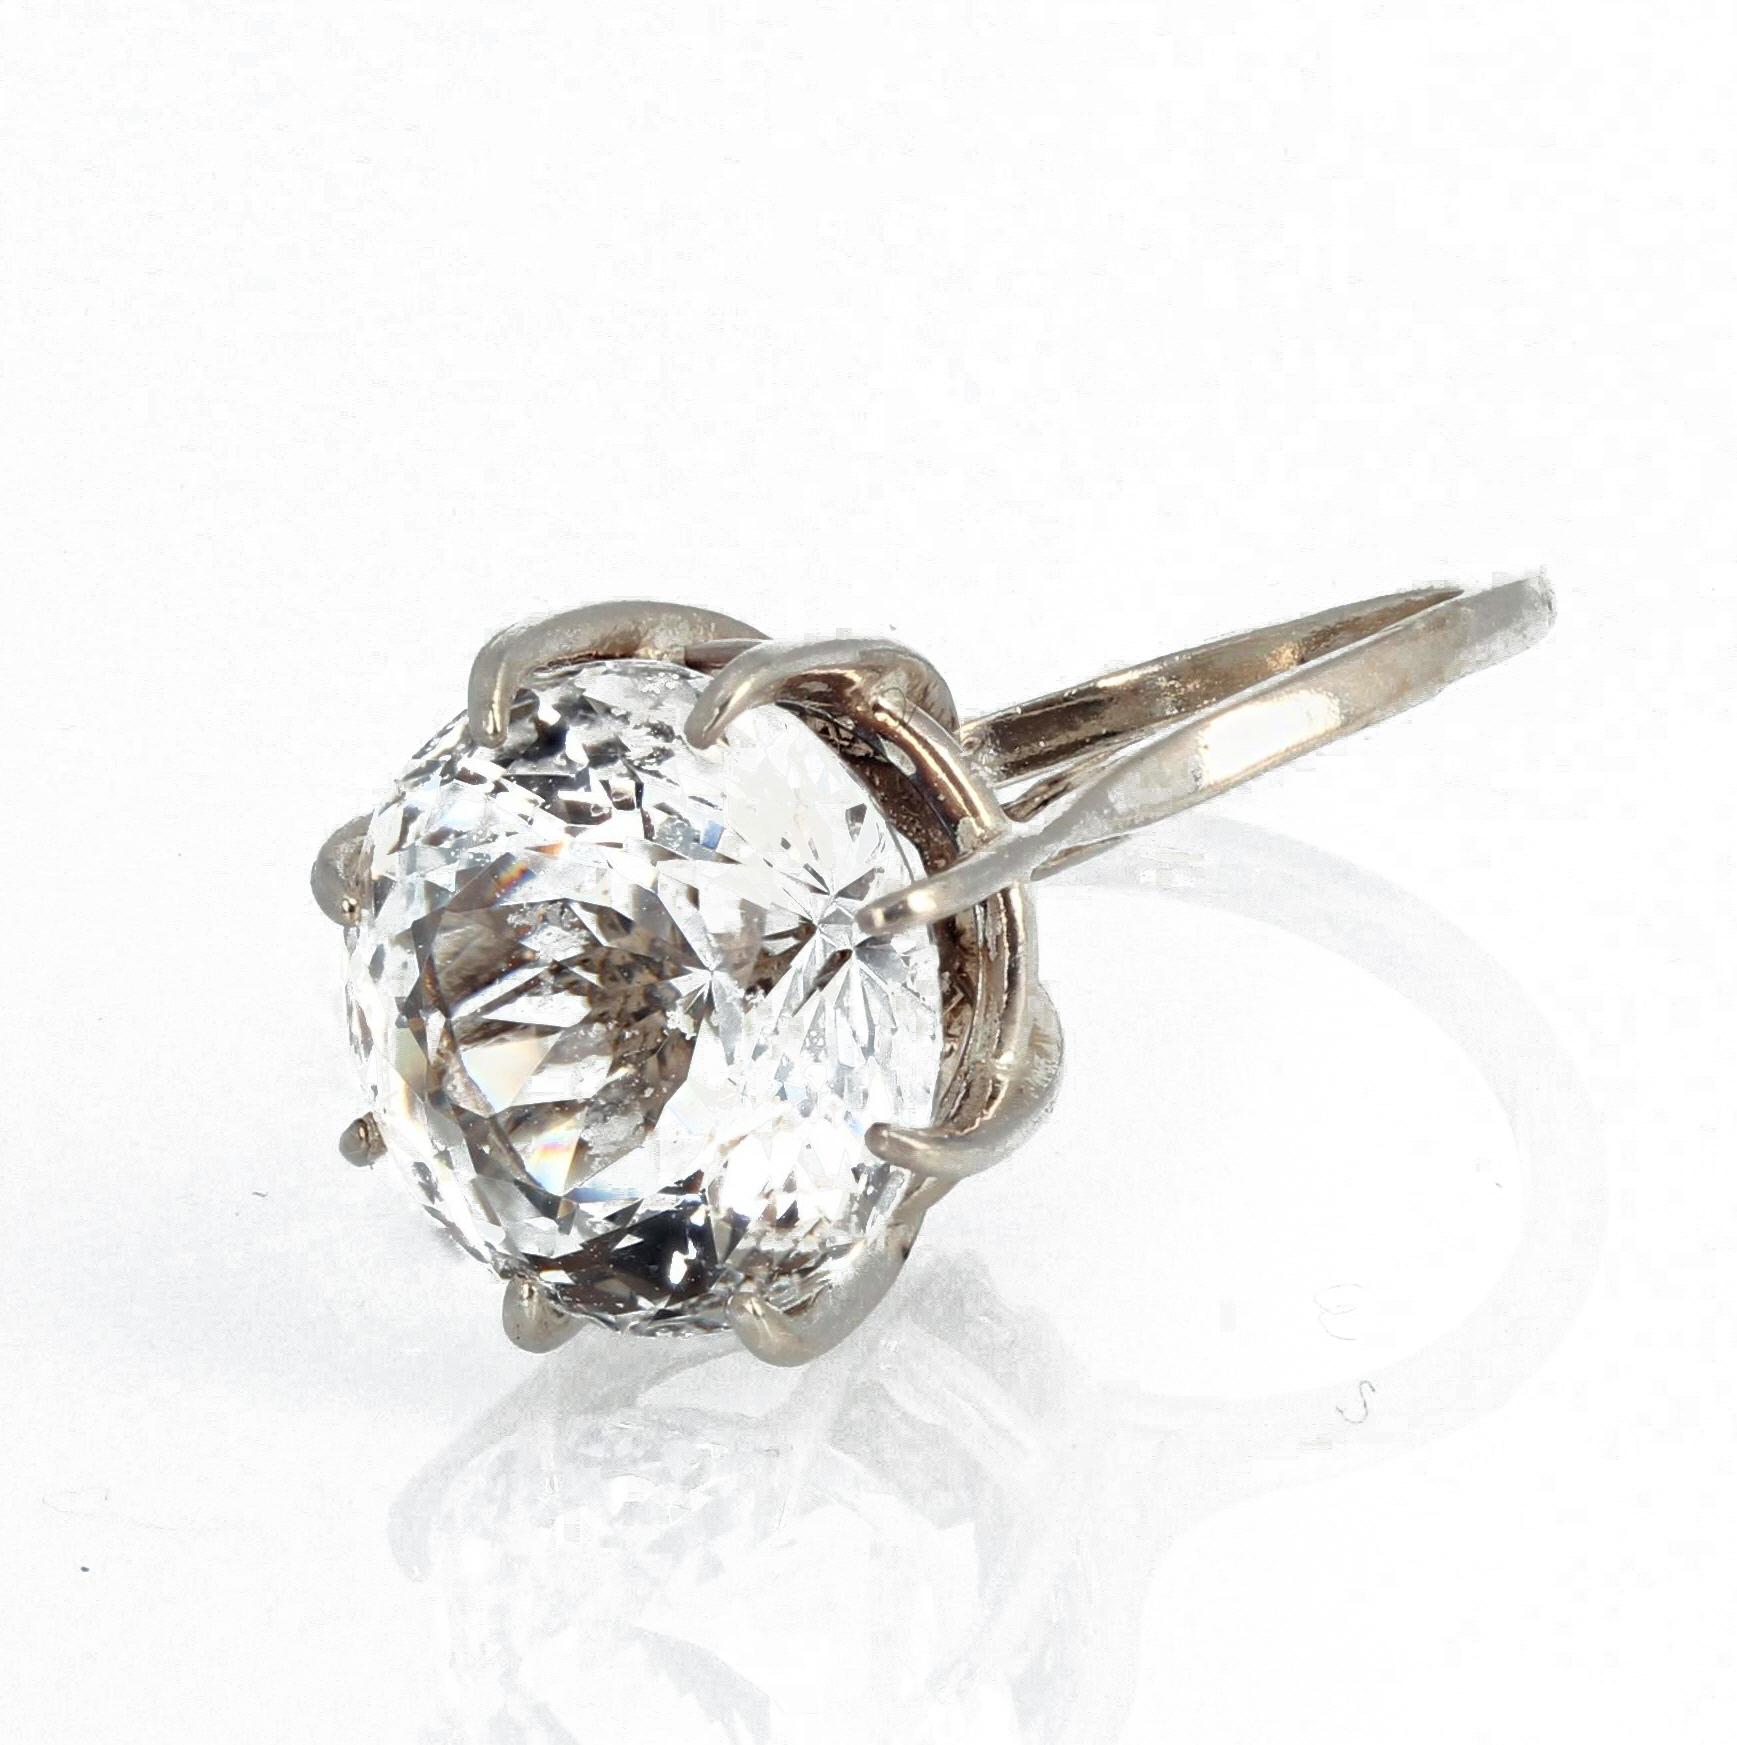 Huge natural glittering 19 carat Silver Topaz (19mm) set in a sterling silver ring size 7 1/2 (sizable). Spectacular optical effect in the topaz exhibits bright reflections and sparkling silver highlights.  This looks almost like a HUGE diamond. 